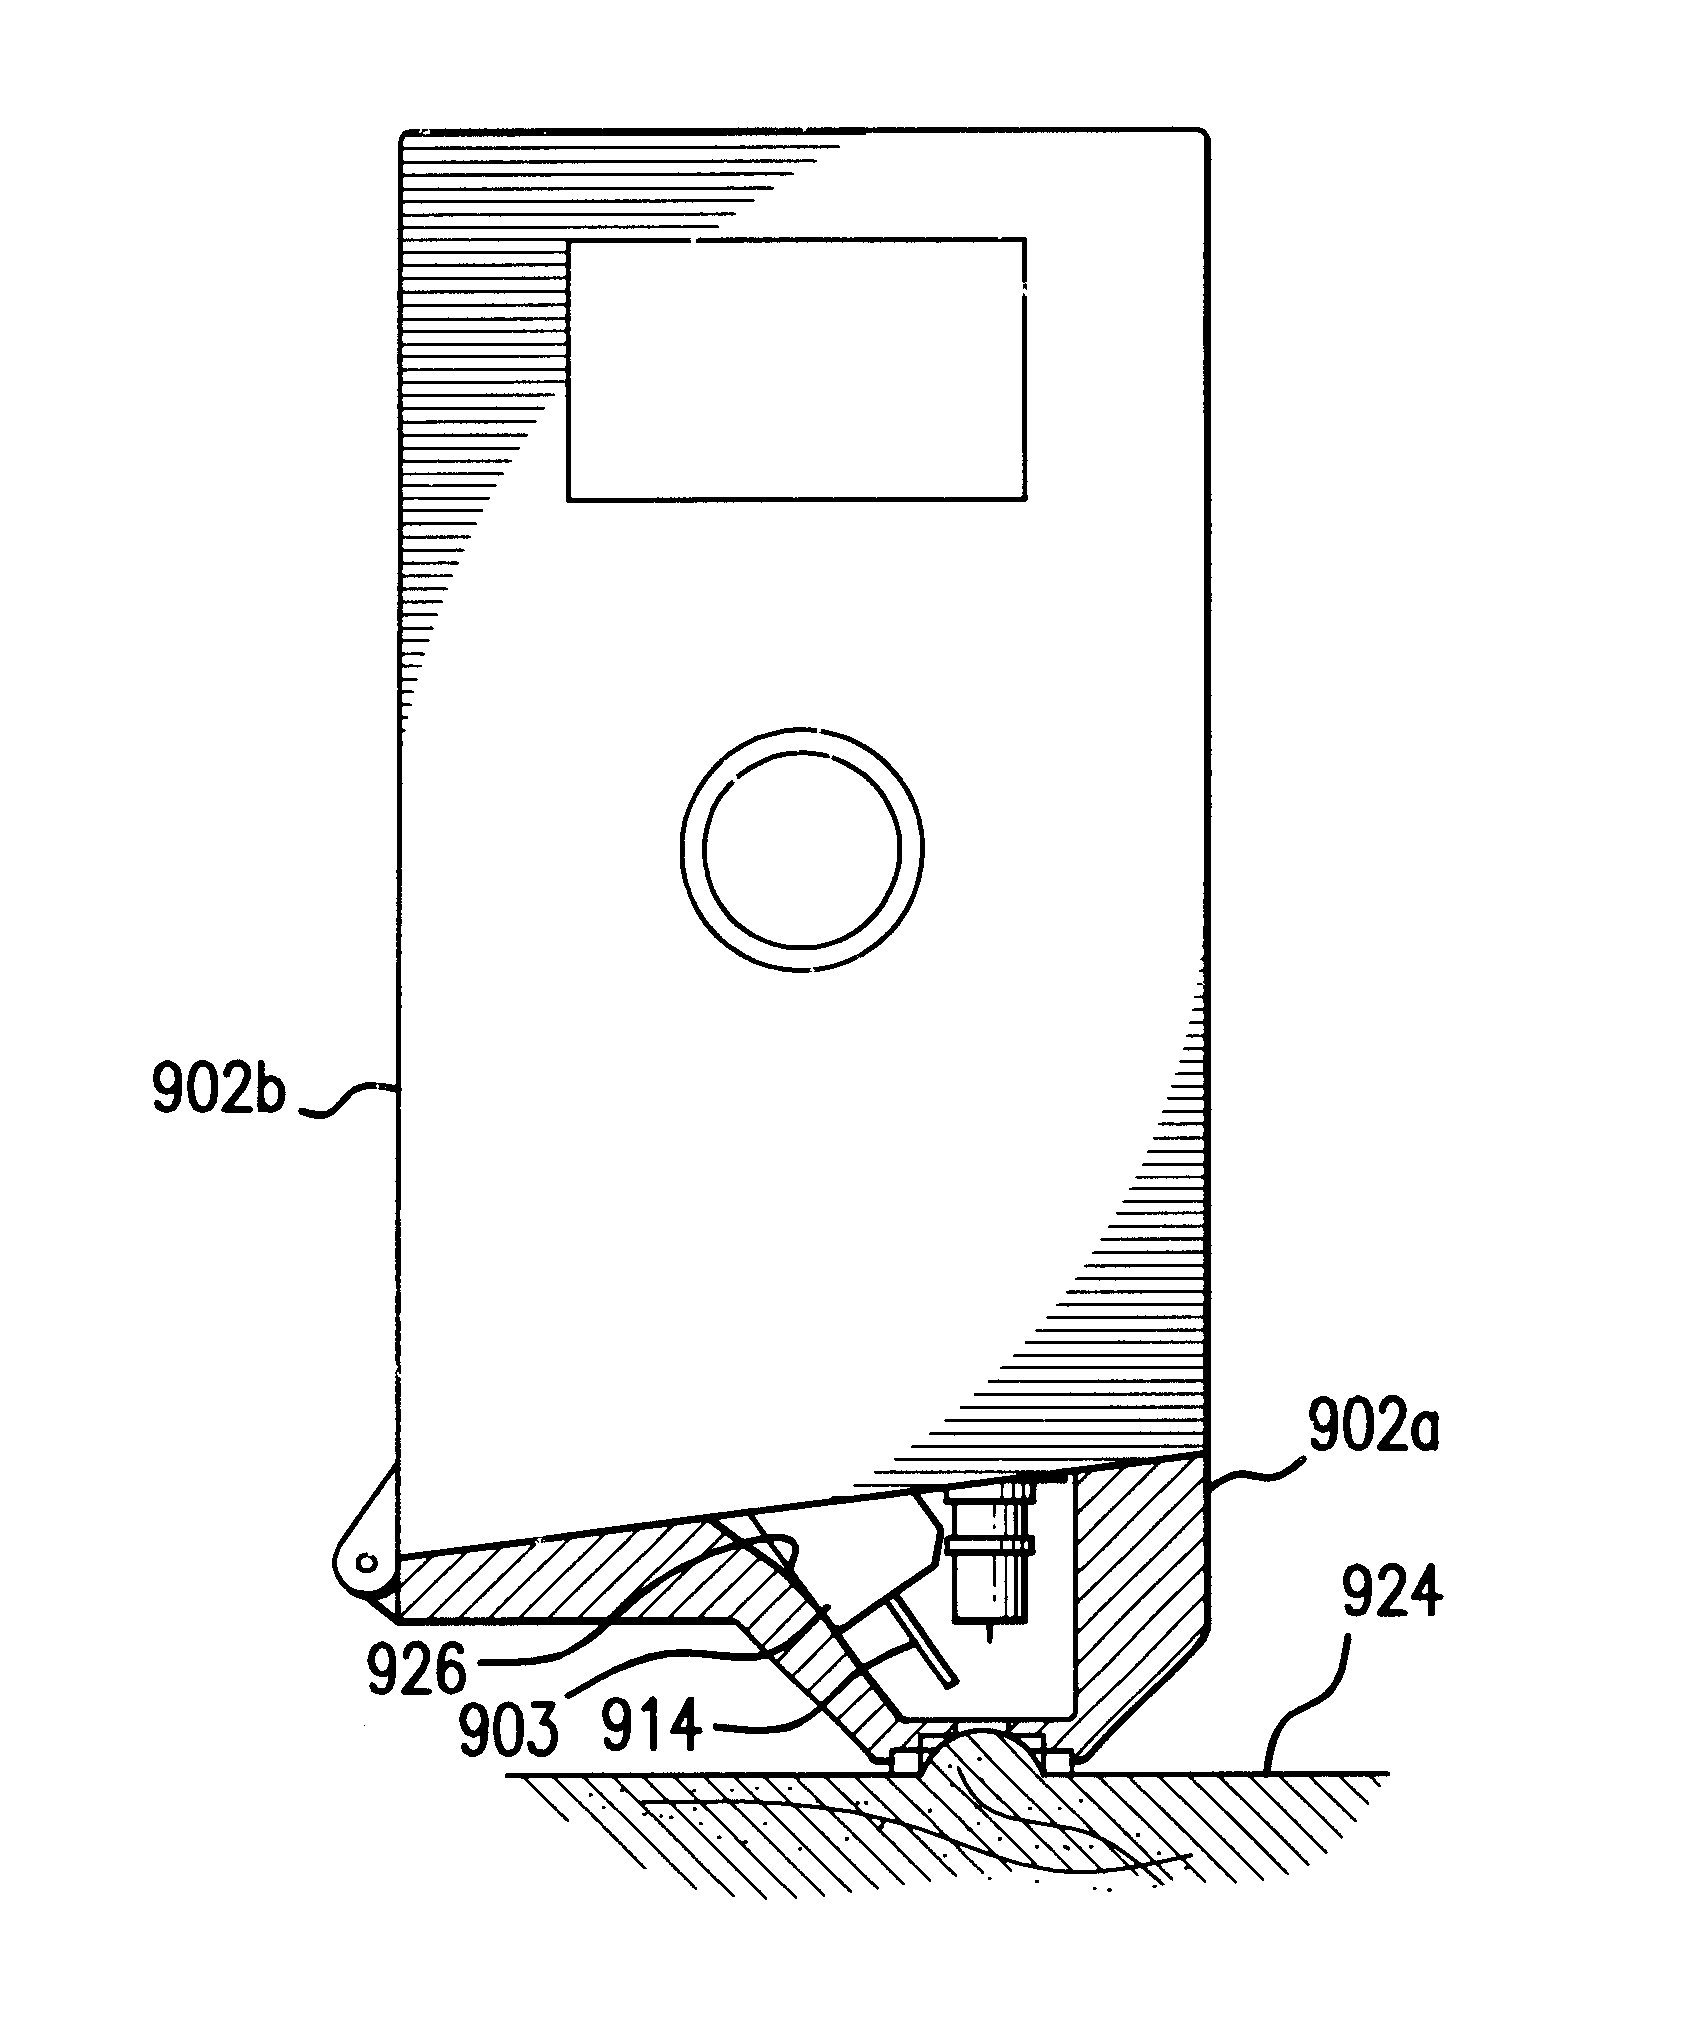 Method and apparatus for obtaining blood for diagnostic tests